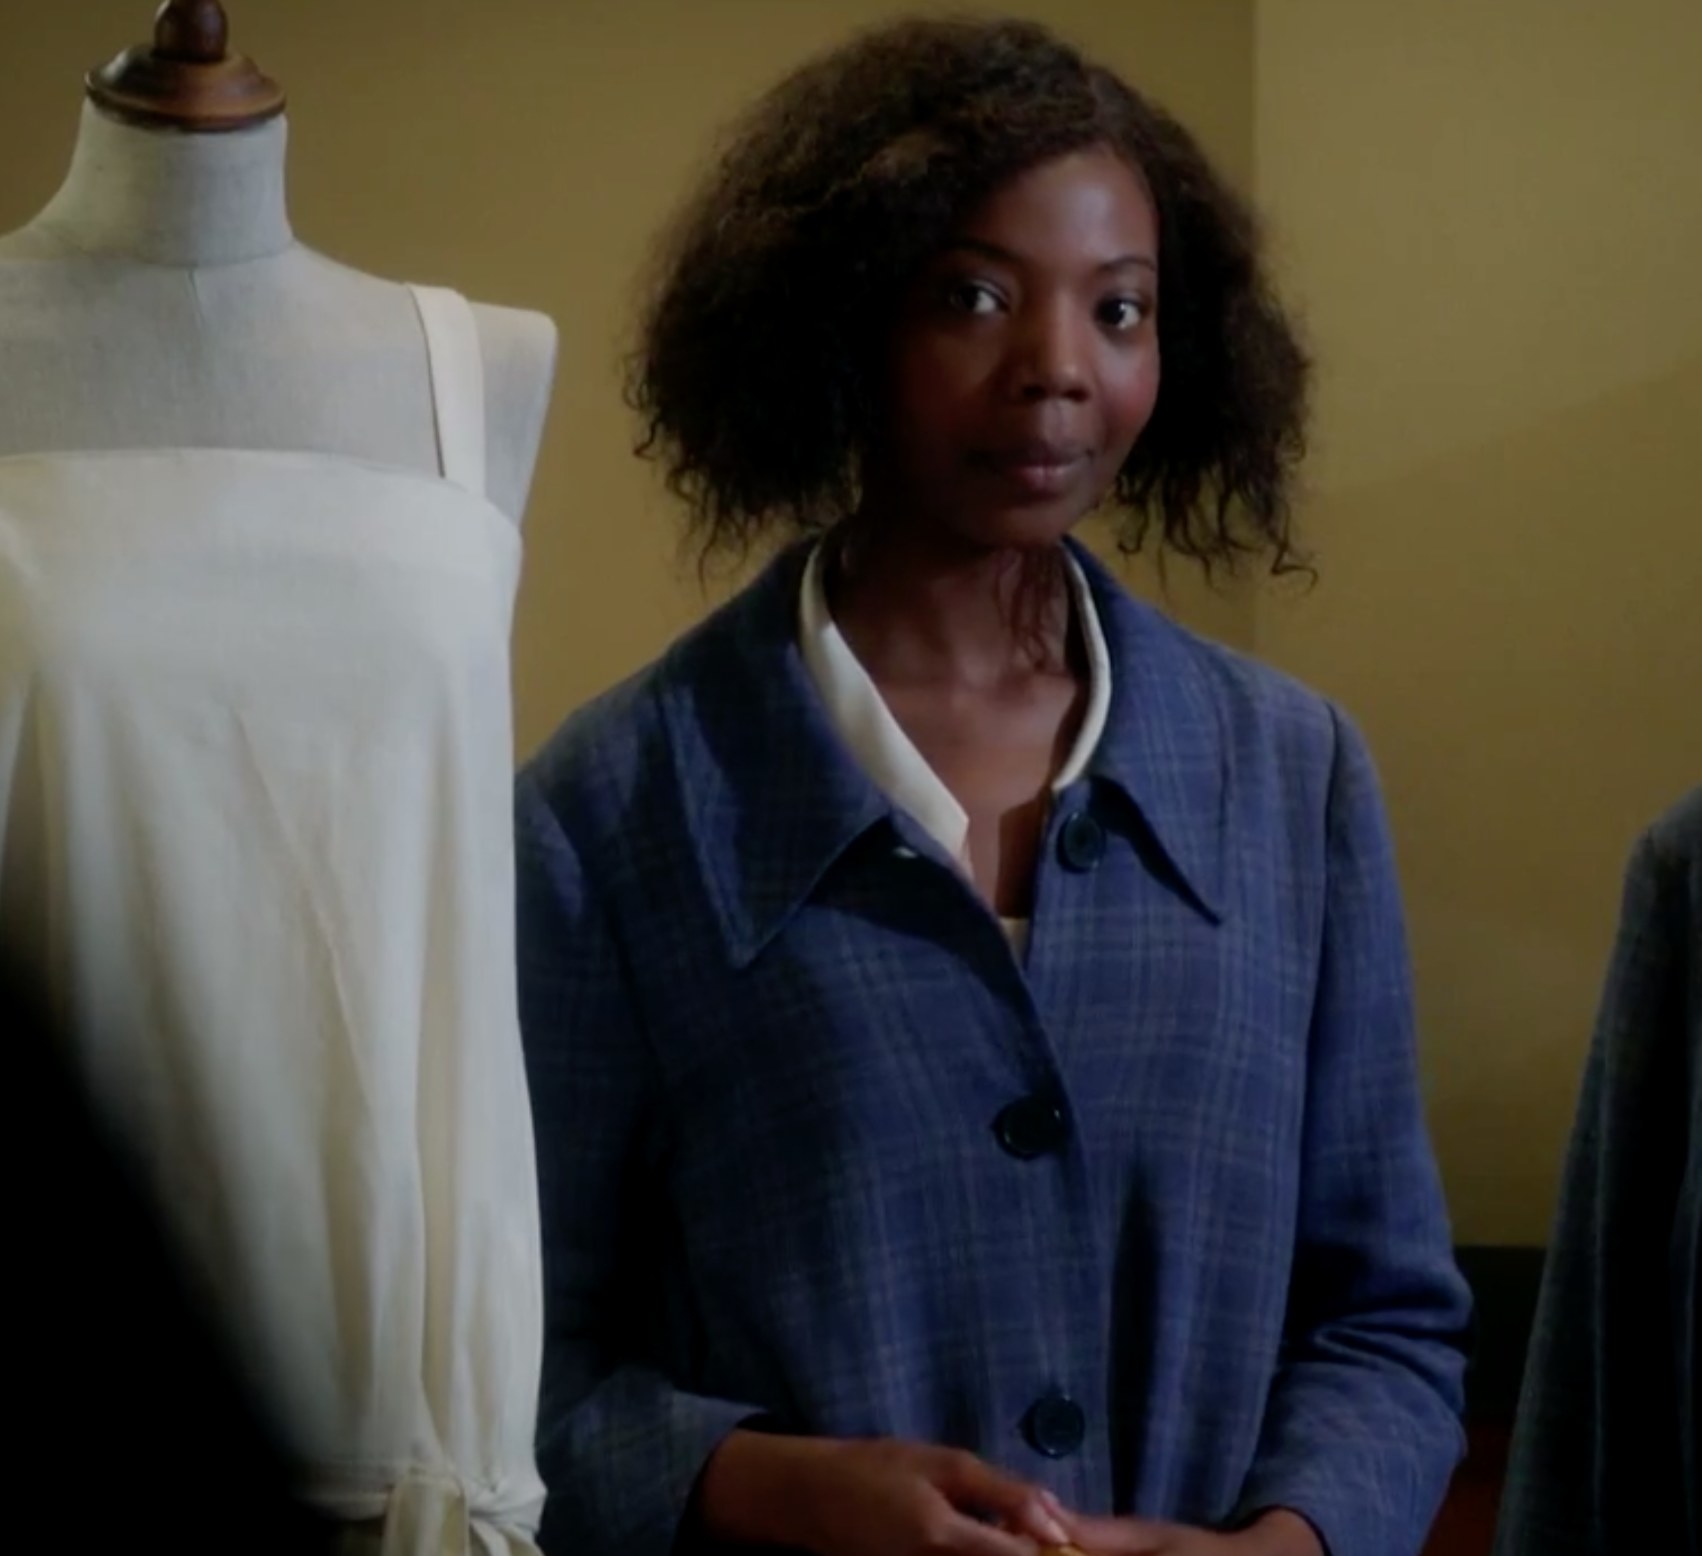 Mimi Ndiweni as Tilly, a seamstress, answers a question proposed by Lady Mae in &quot;Mr Selfridge&quot;